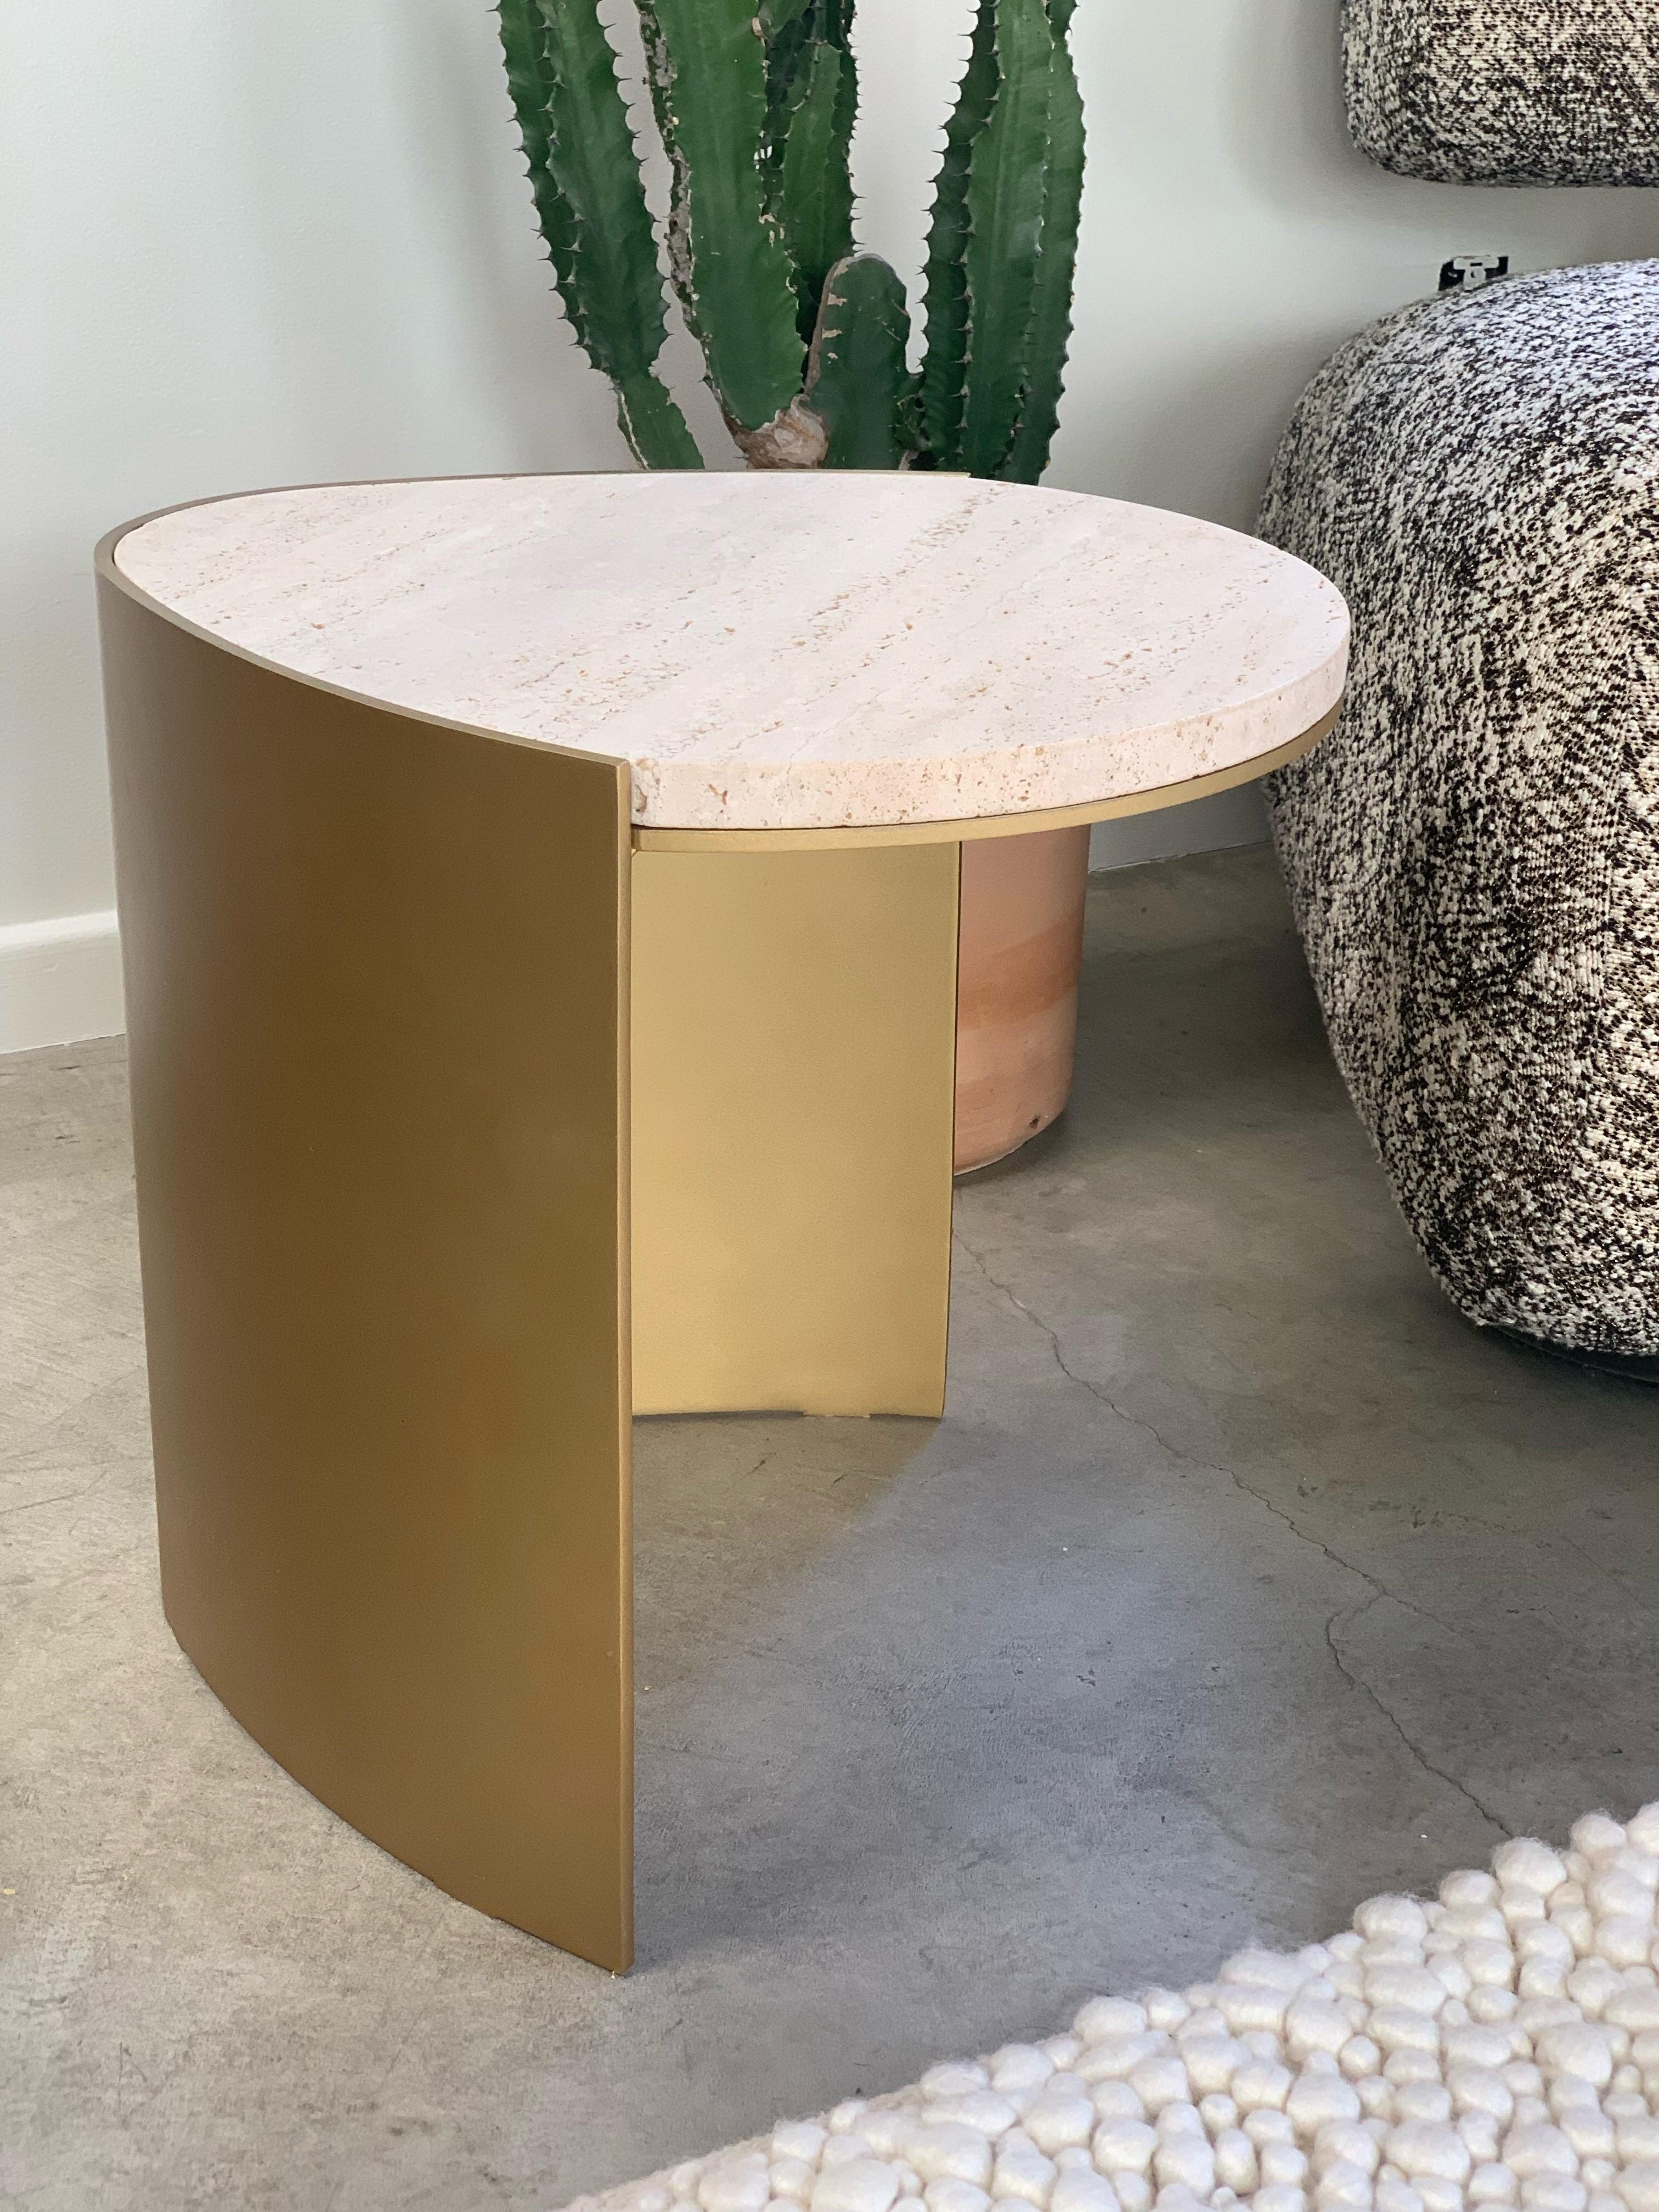 Teardrop marble side table by Atra Design
Dimensions: D 45 x W 38 x H 40 cm
Materials: Travertine Navona, pavonado brass
Other marbles and stones available.

Atra Design
We are Atra, a furniture brand produced by Atra form a mexico city–based high